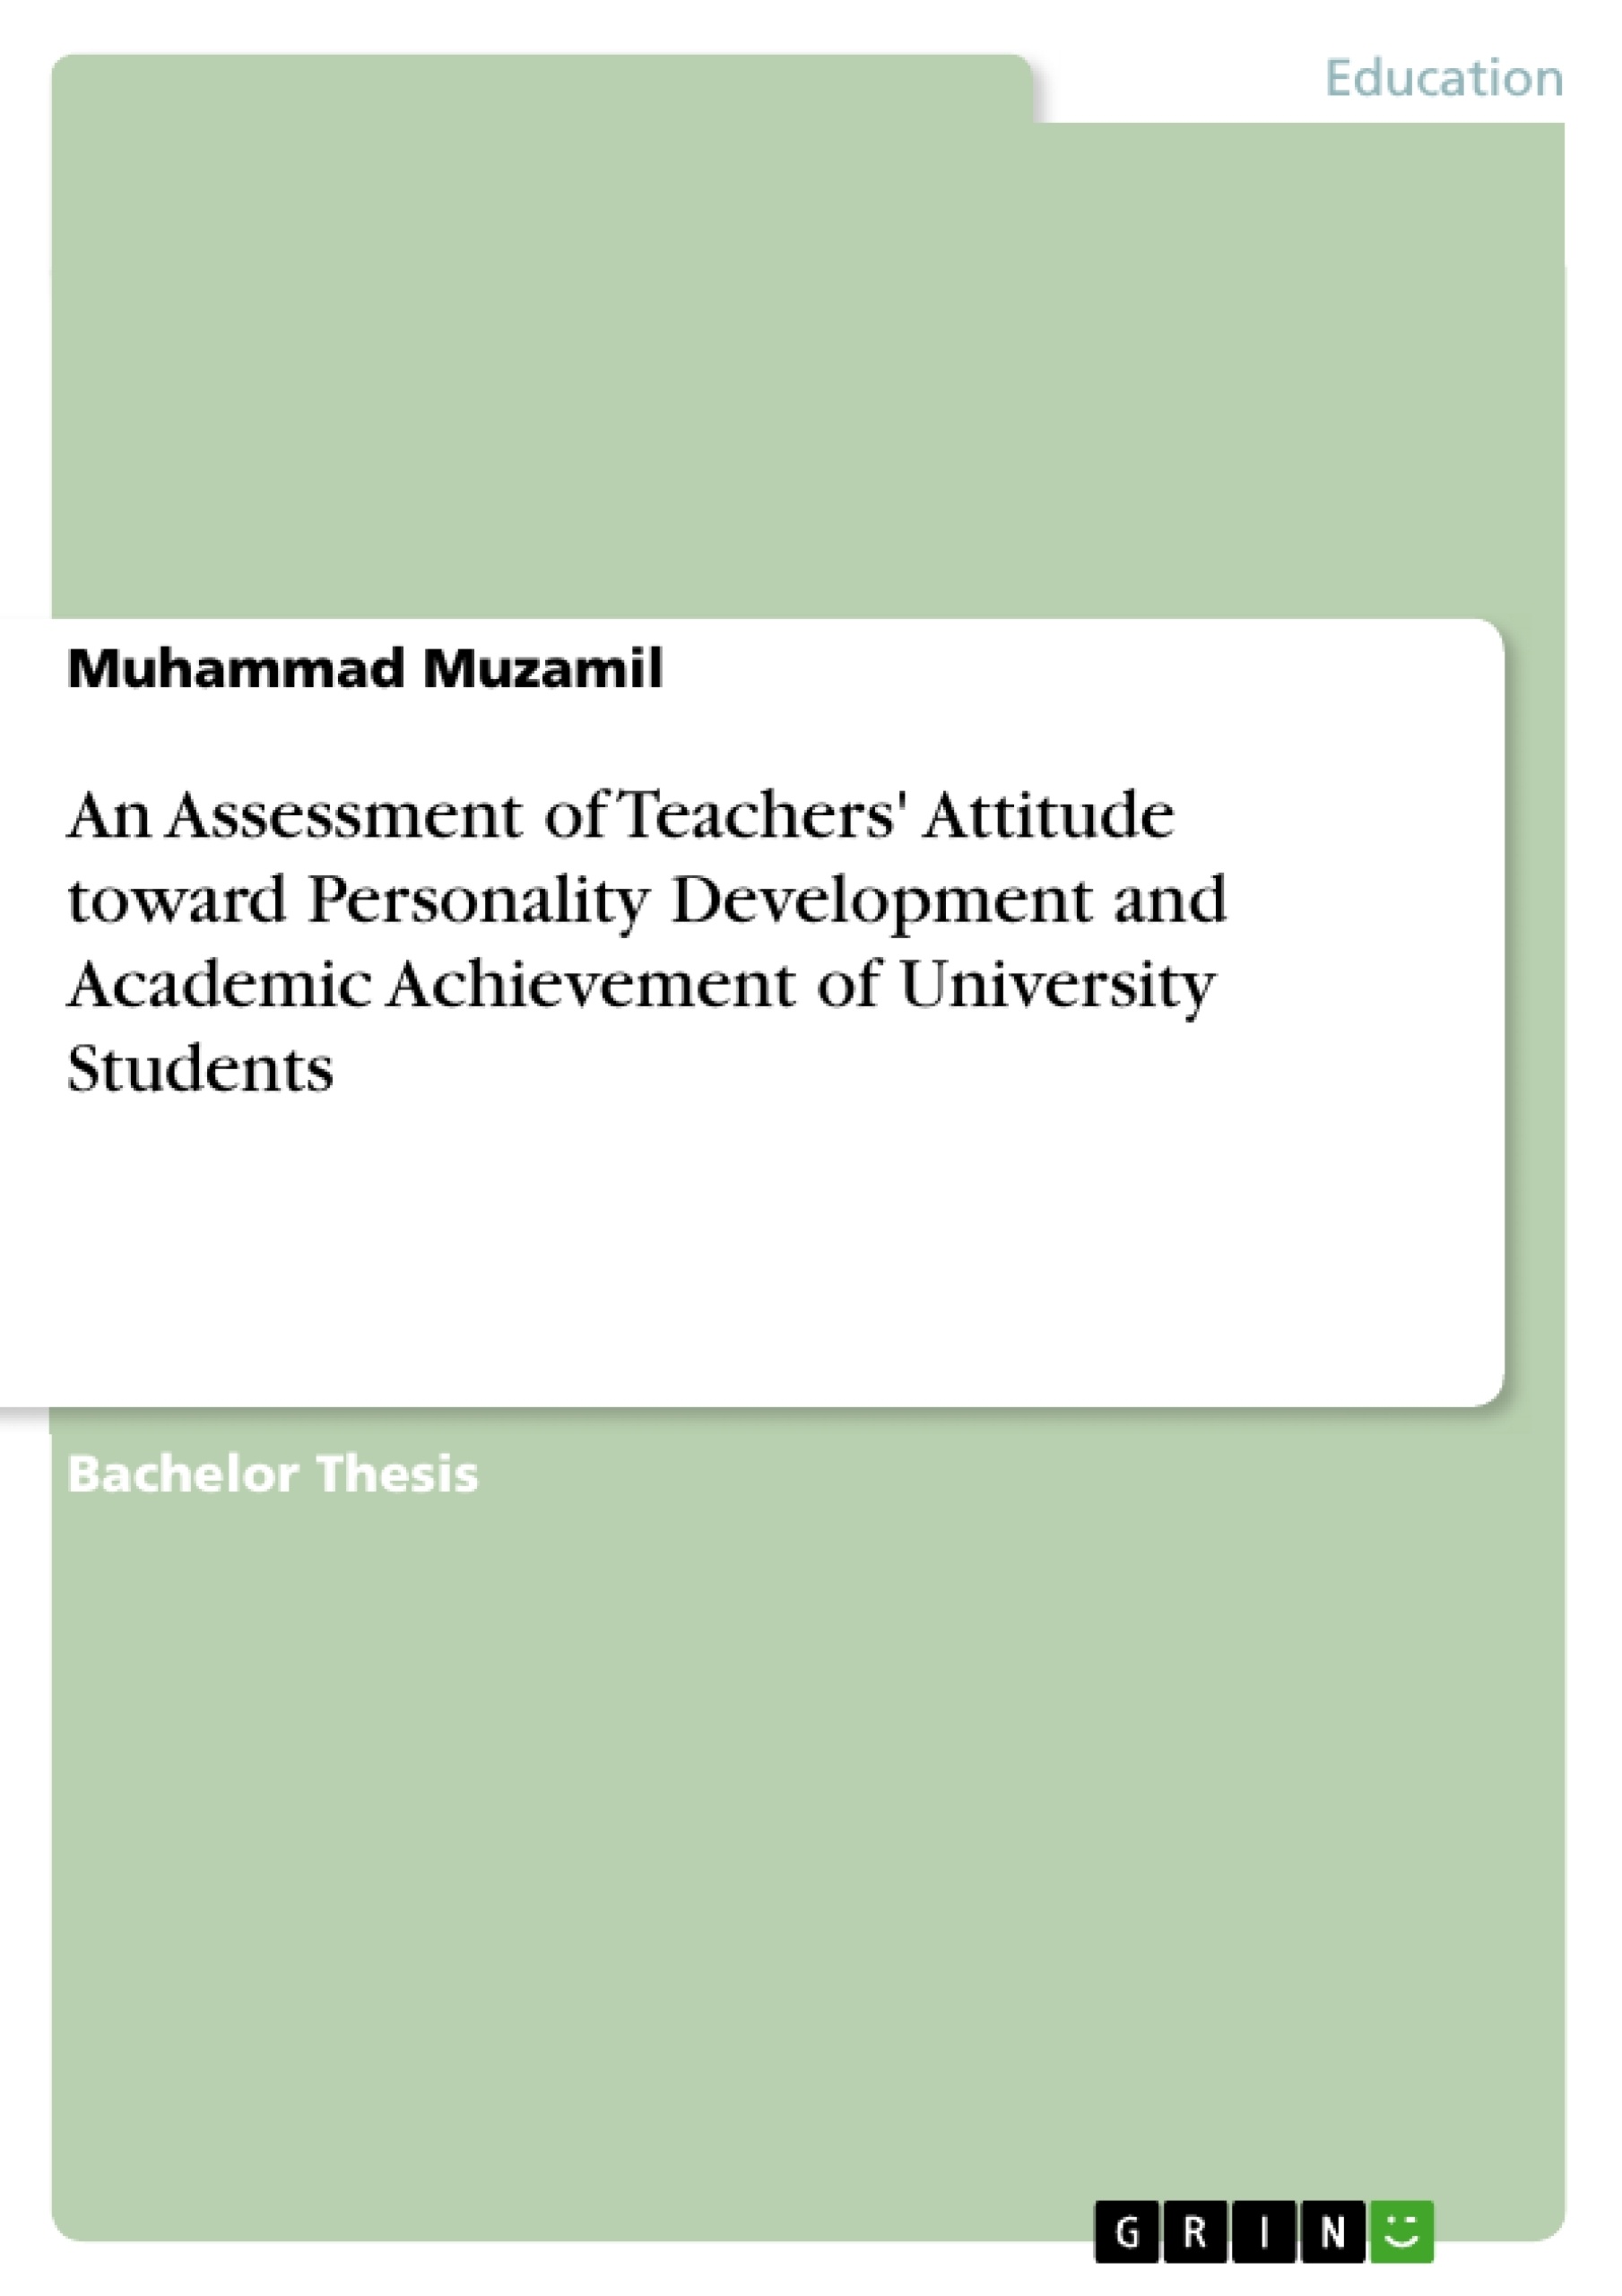 Título: An Assessment of Teachers' Attitude toward Personality Development and Academic Achievement of University Students